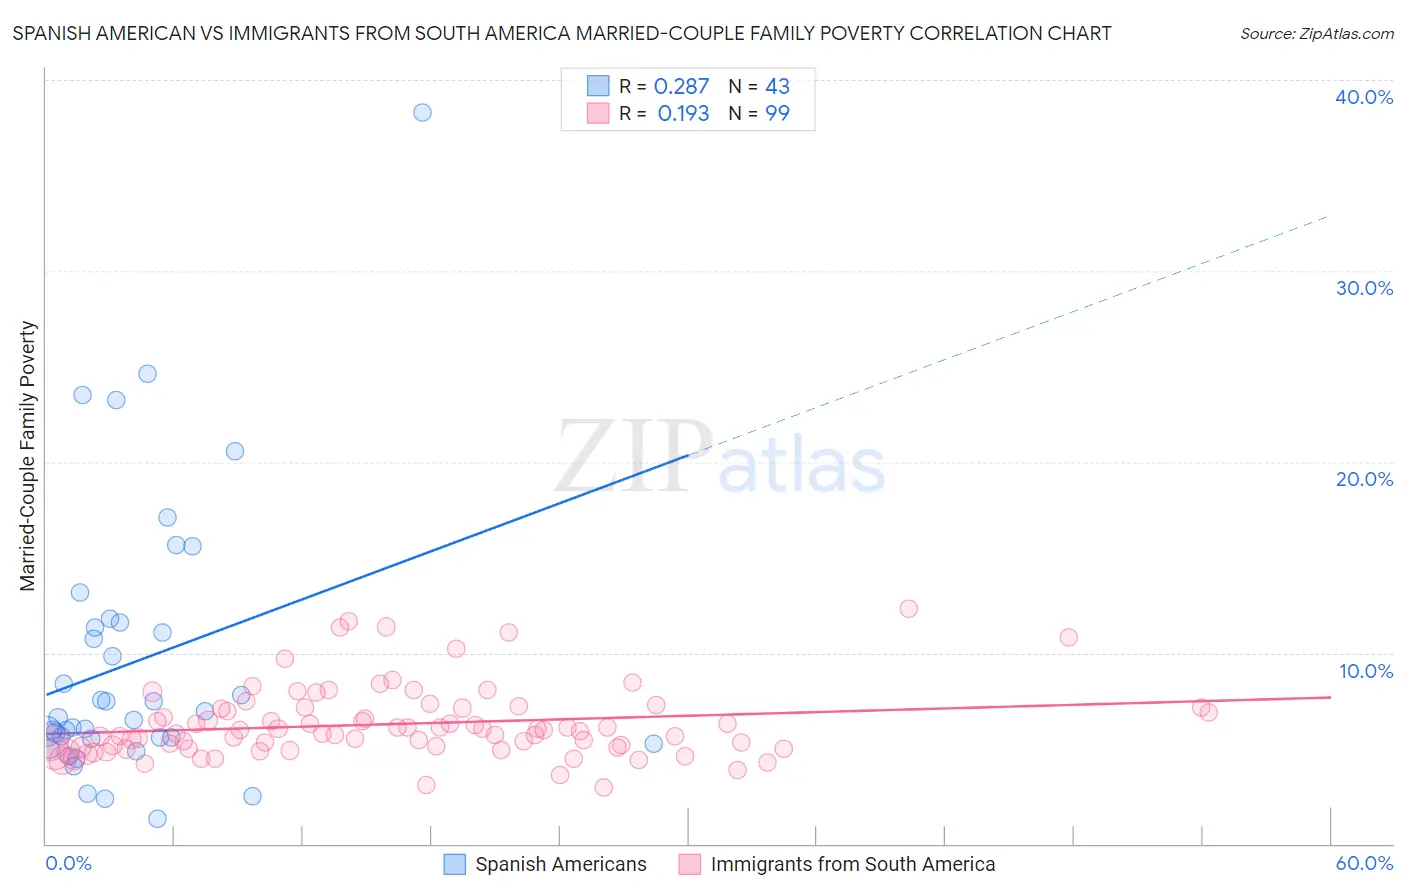 Spanish American vs Immigrants from South America Married-Couple Family Poverty